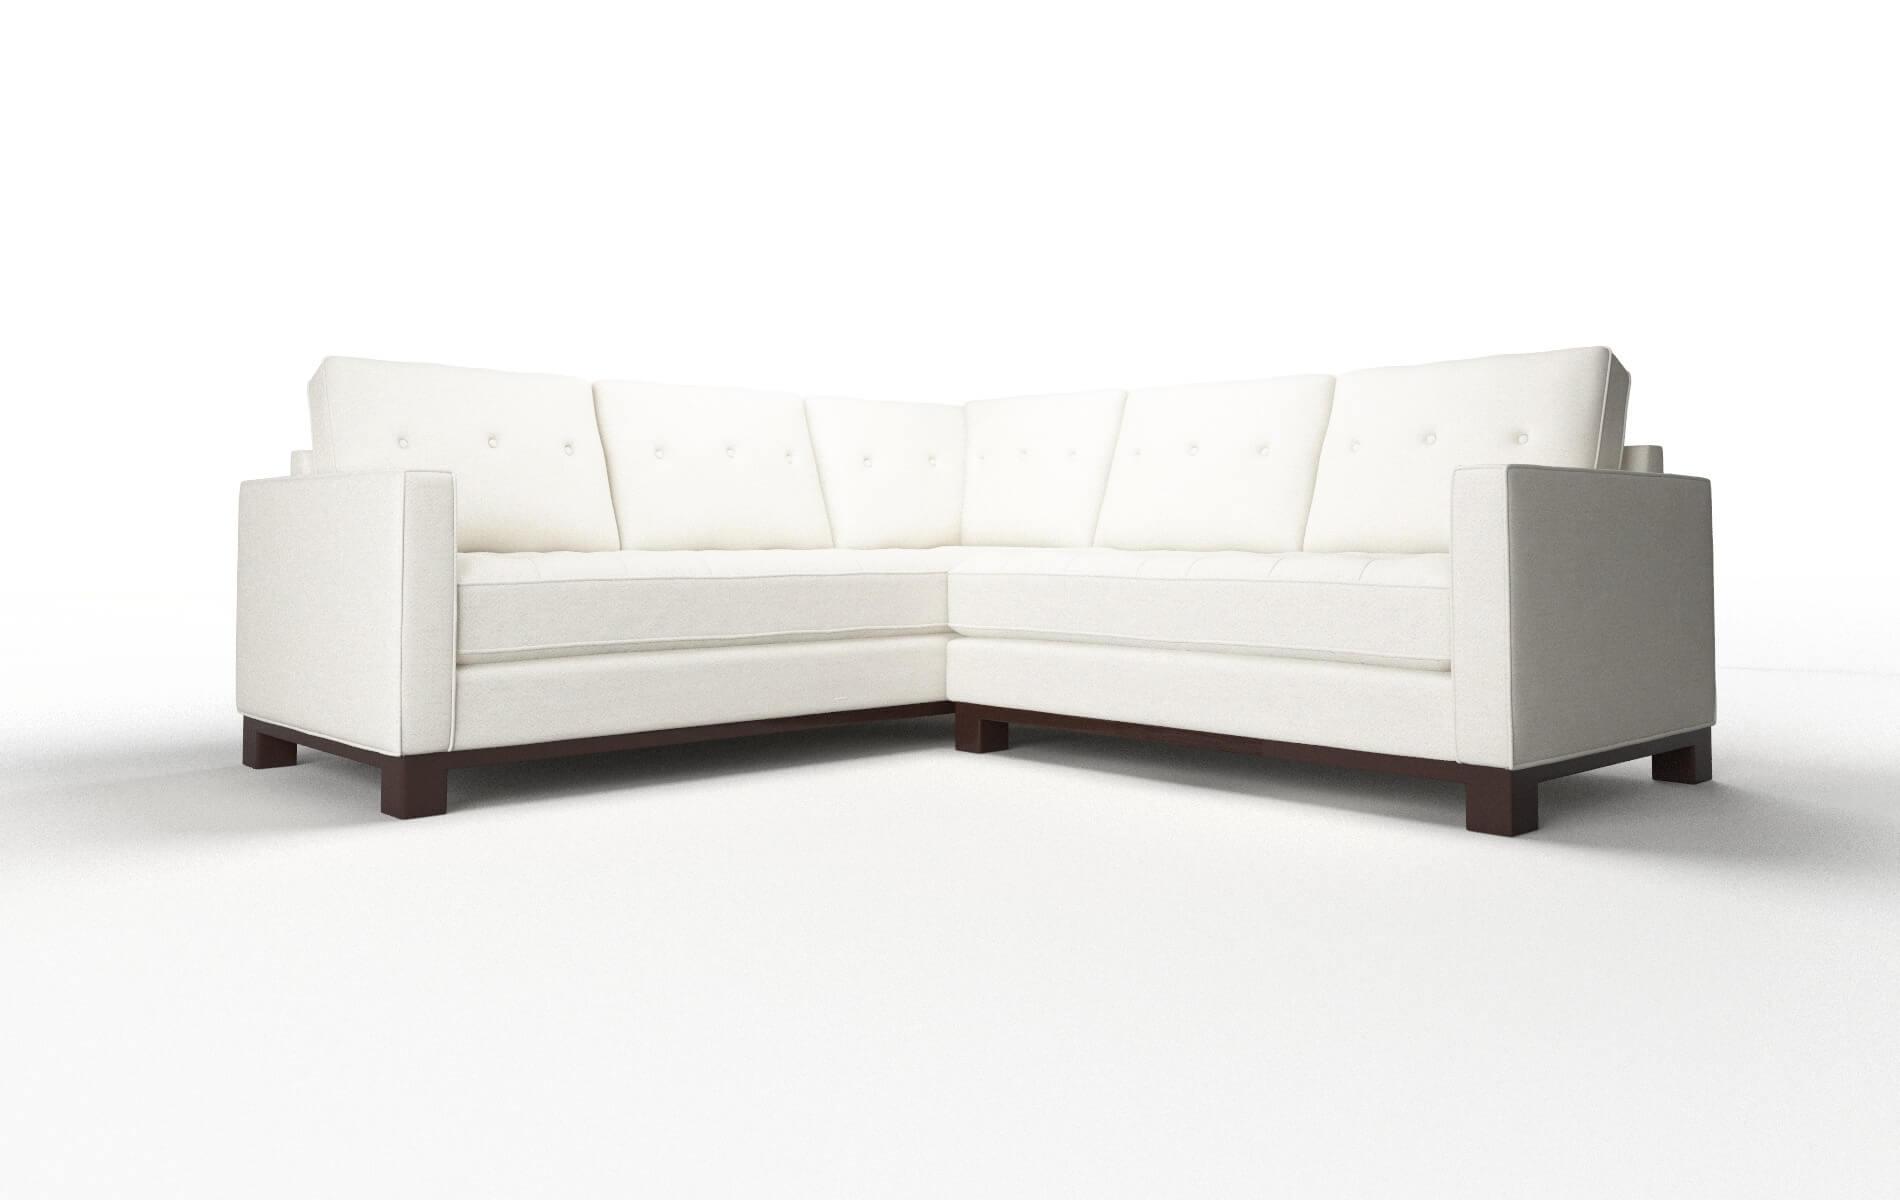 Syros Catalina Ivory Sectional espresso legs 1